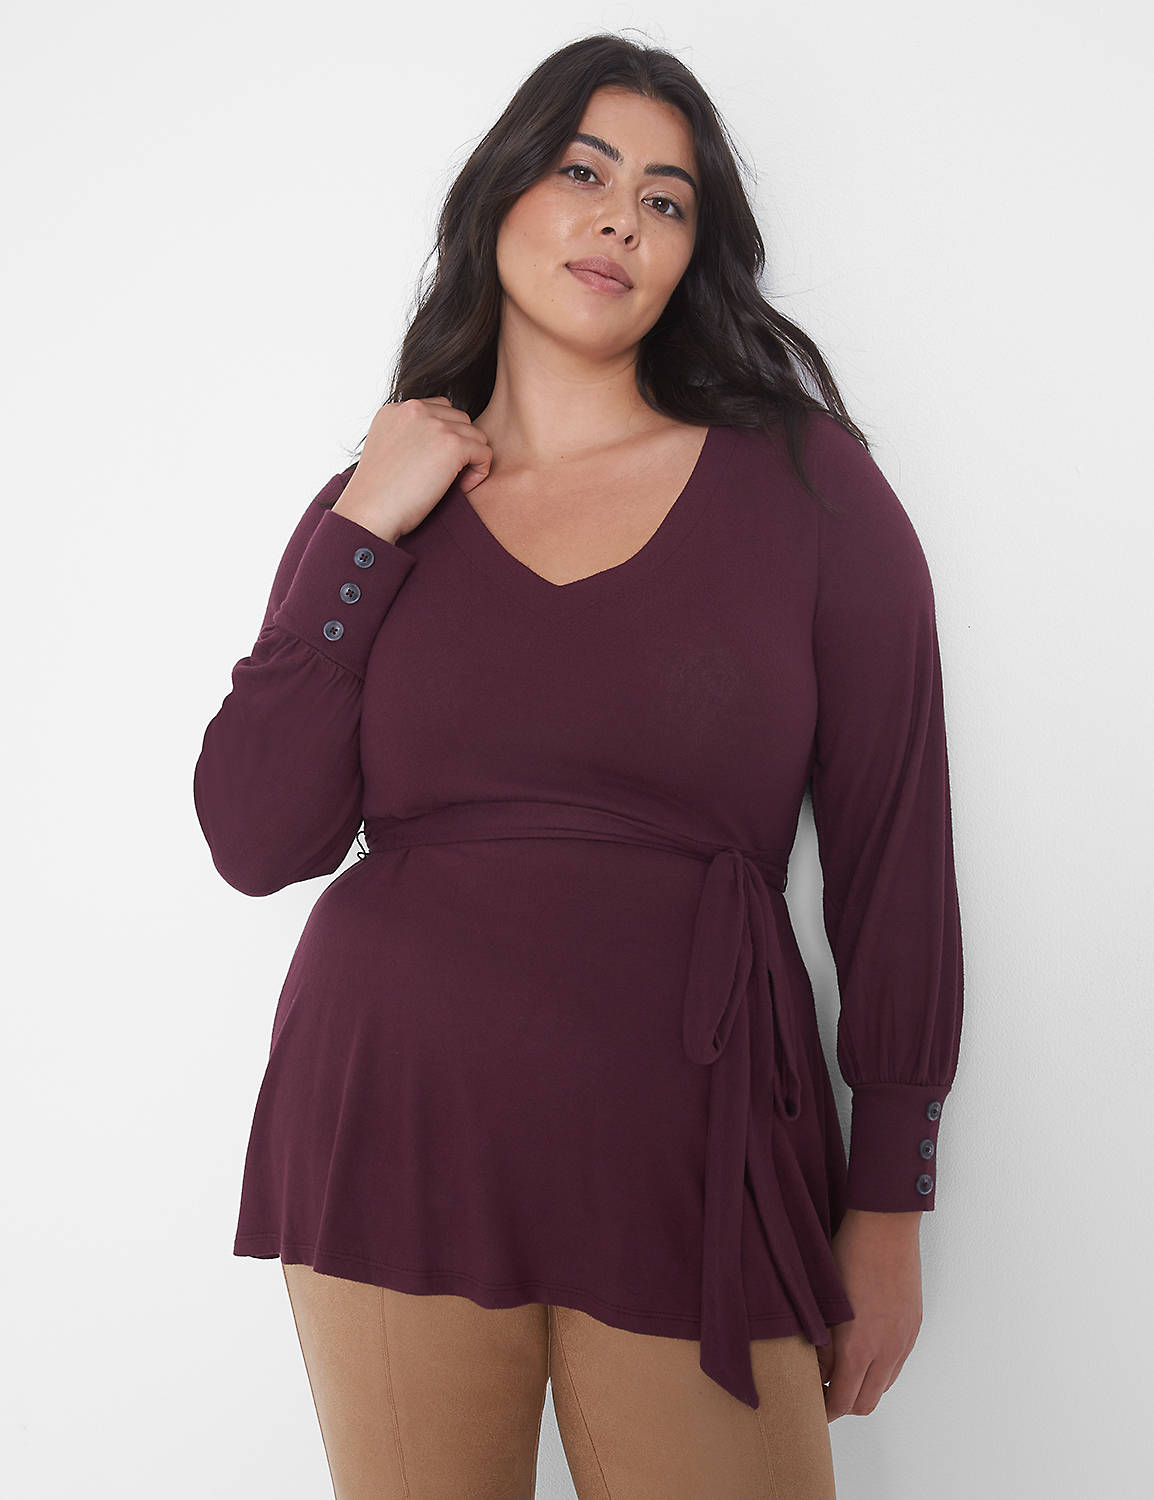 Long Sleeve V-Neck Tunic In Hacci 1 Product Image 1